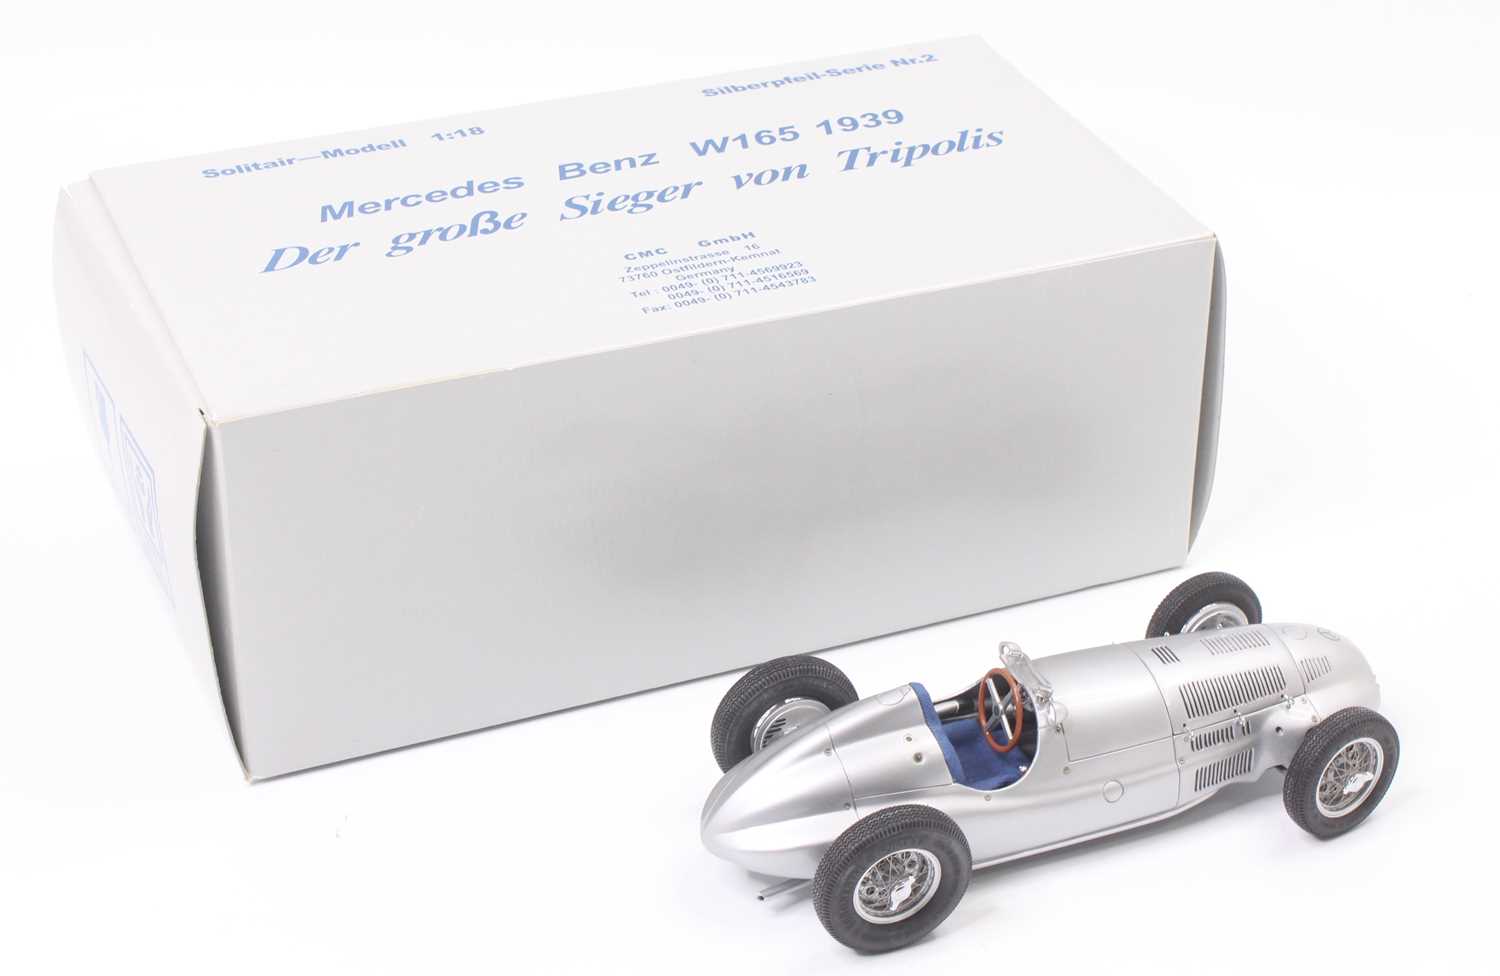 A CMC No. M-018 1/18 scale model of a Mercedes Benz W165 1939 race car finished in silver, housed in - Image 2 of 3